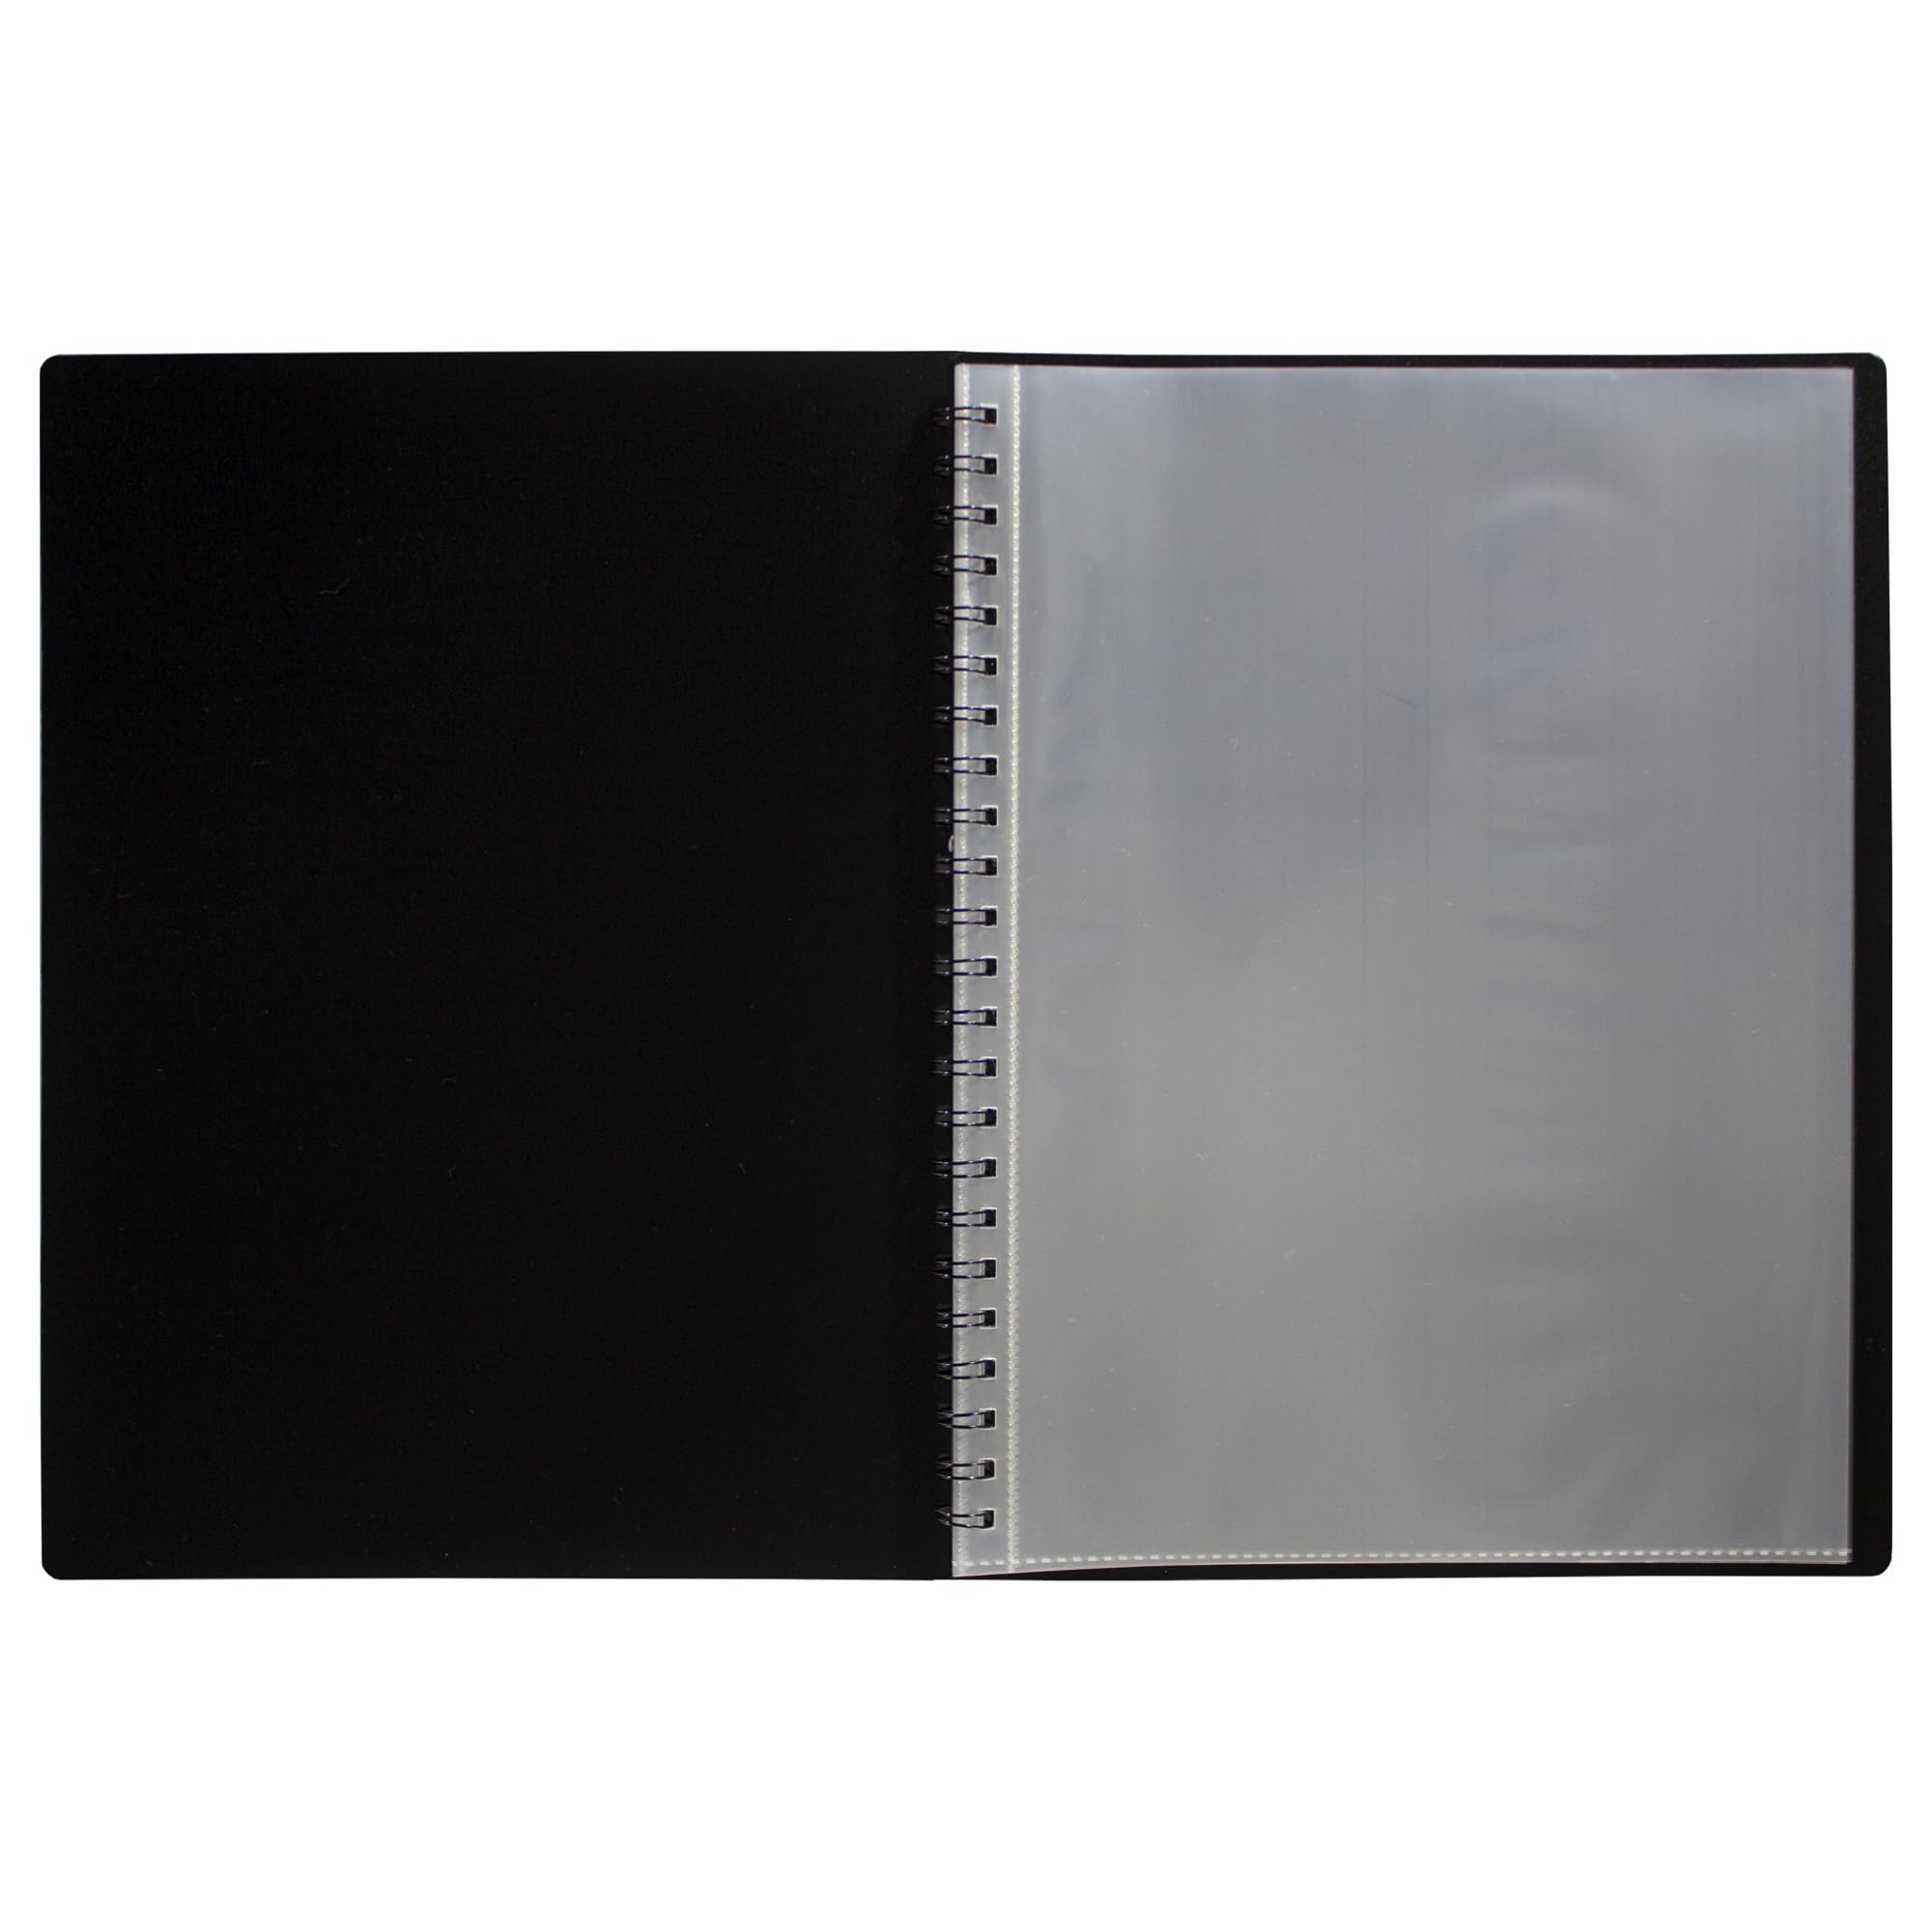 eco-eco A5 50% Recycled 60 Pocket Fold Flat Spiral Bound Display Book, eco138